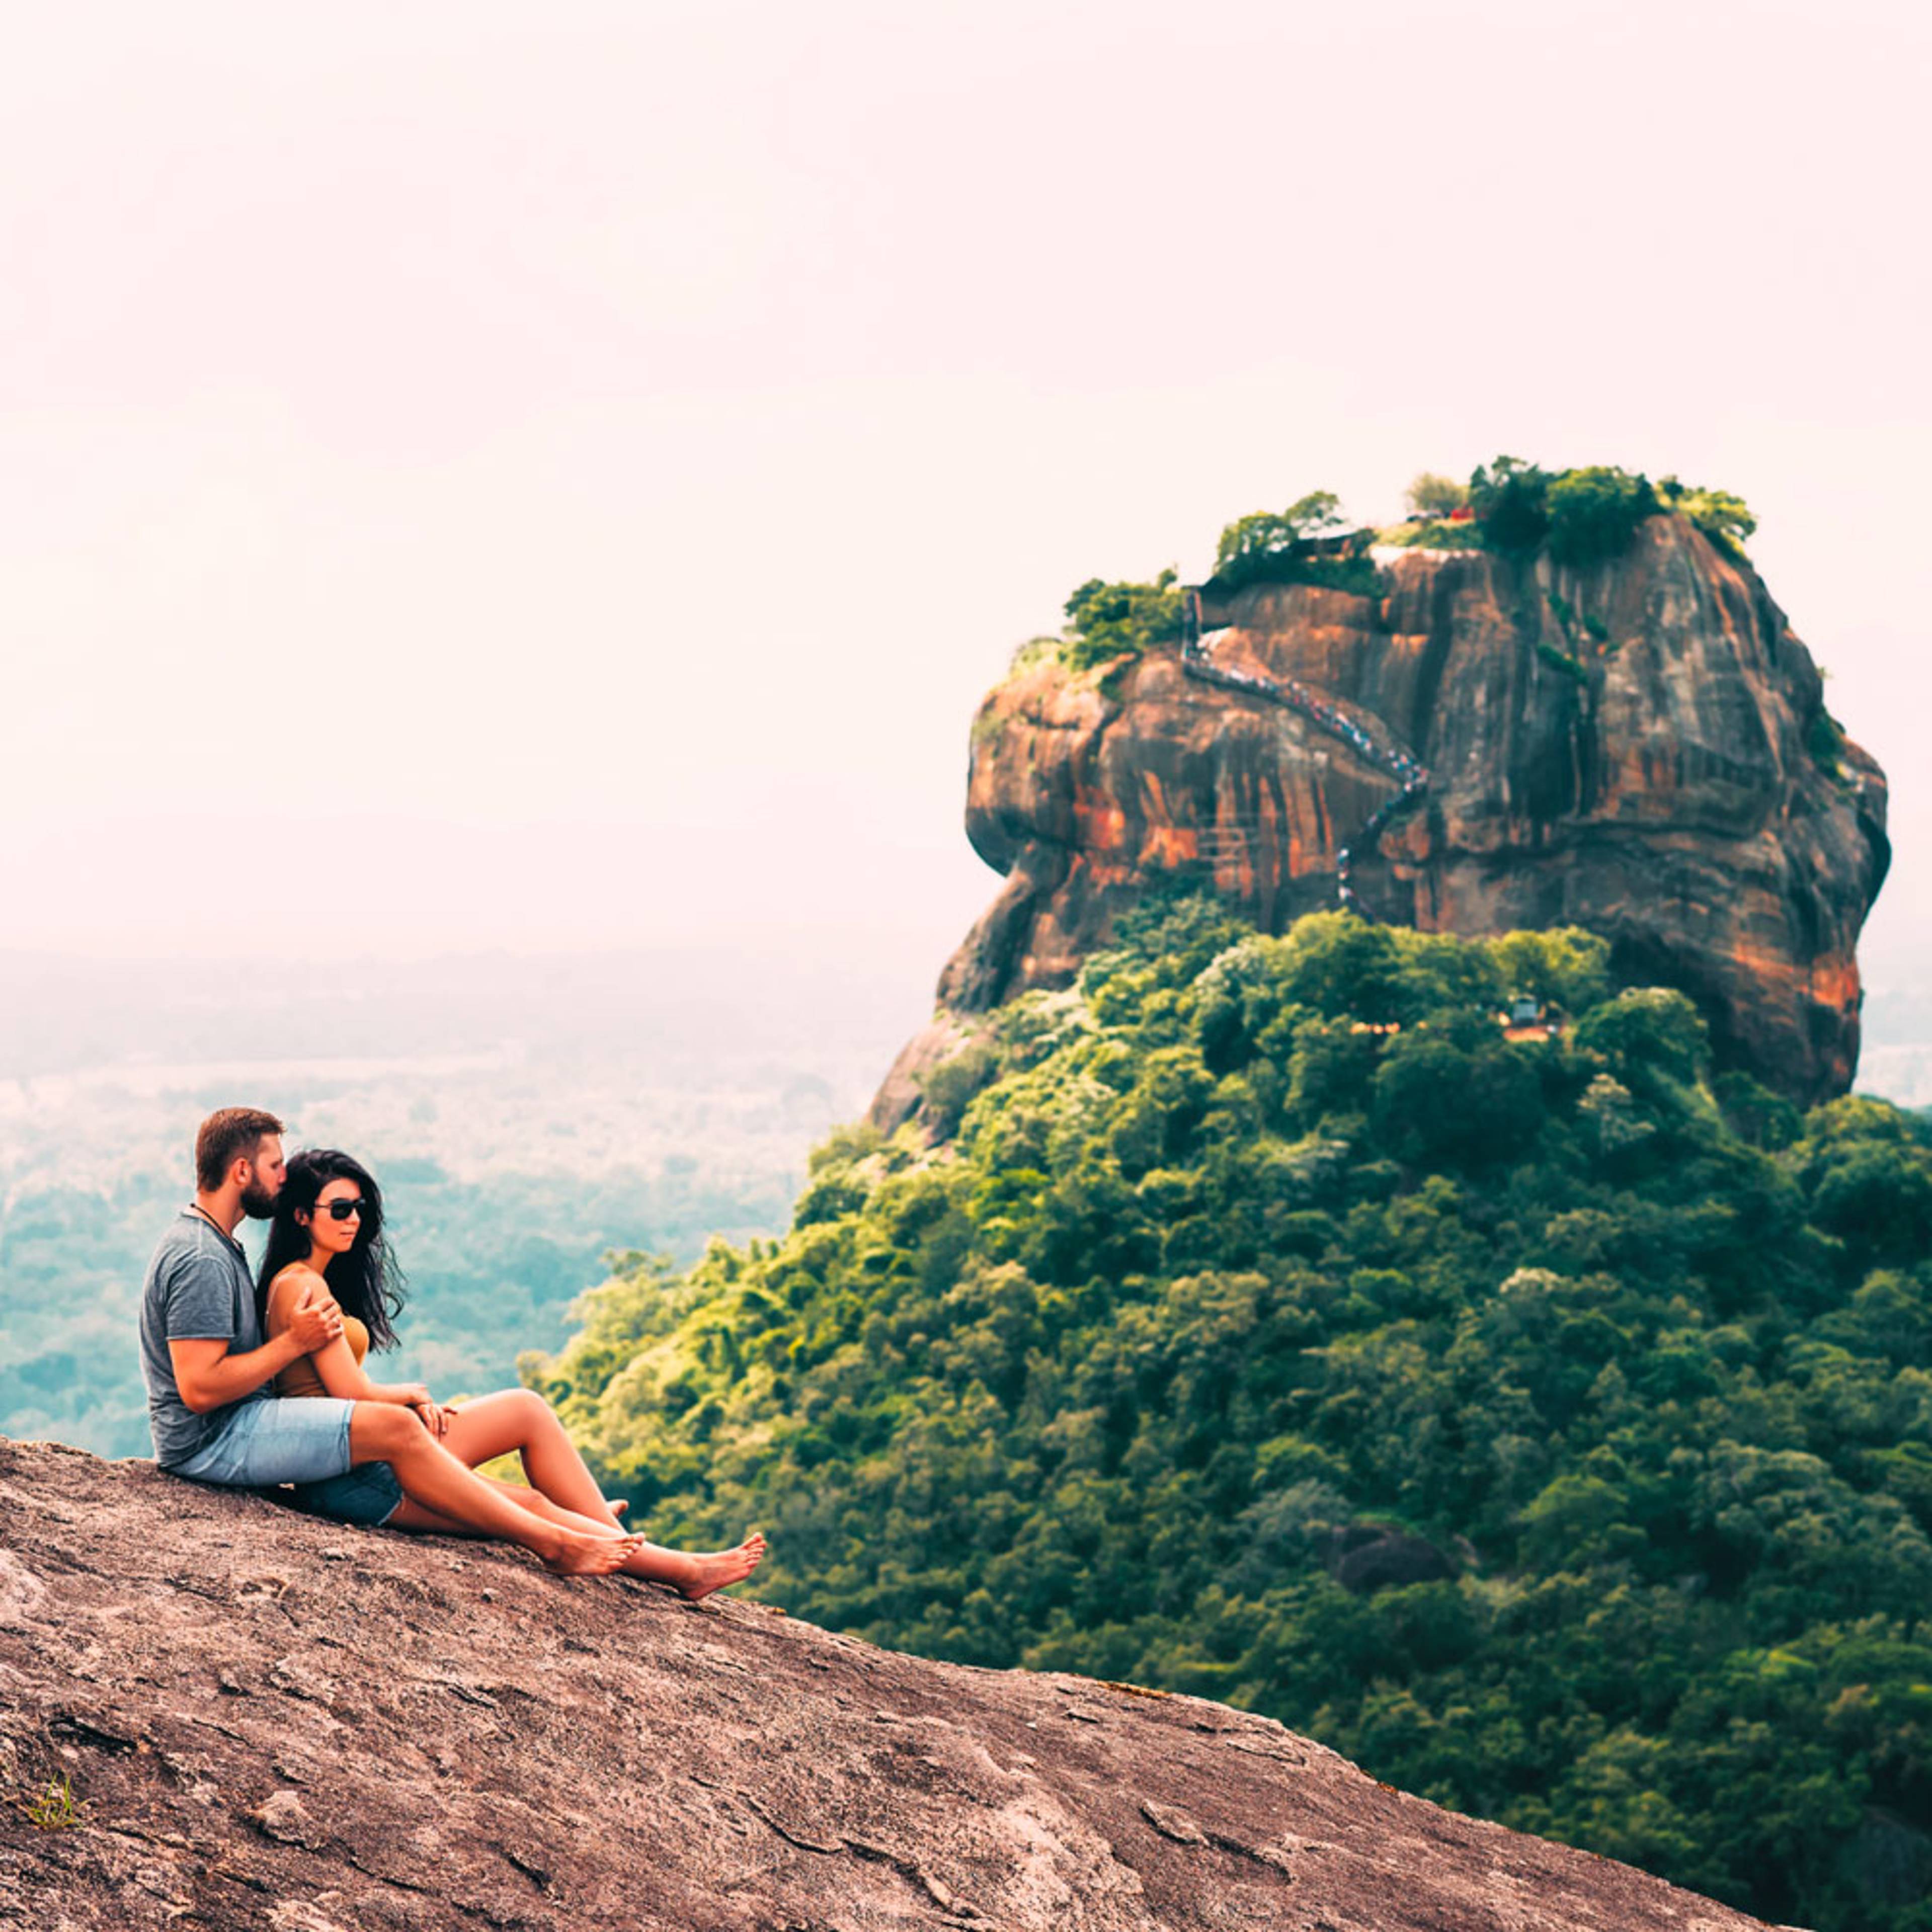 The best local travel agencies in Sri Lanka for honeymoon tours